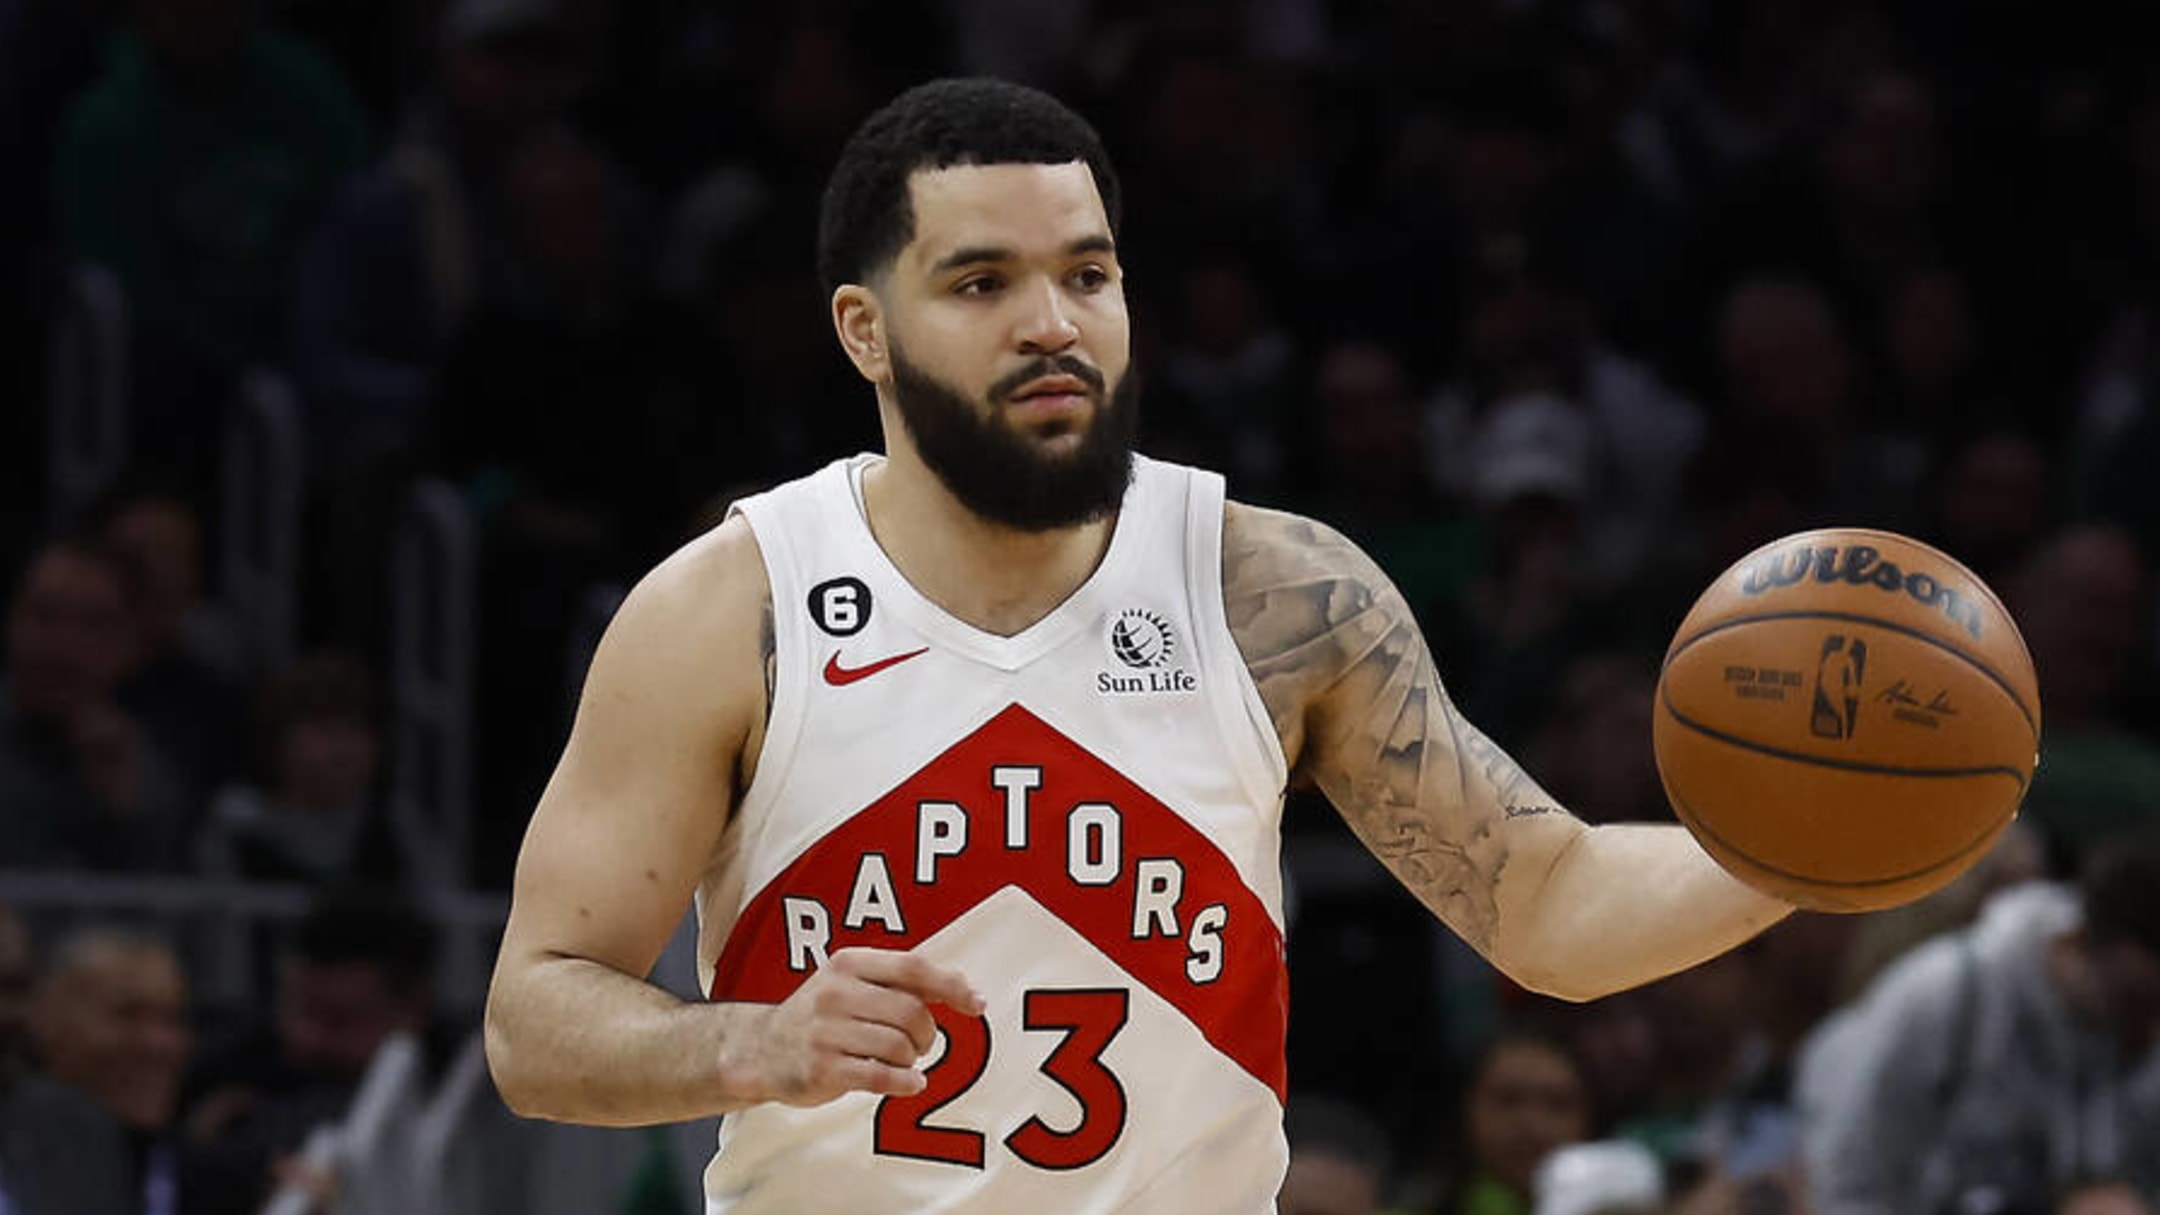 Reports: Rockets sign Fred VanVleet to $130 million deal